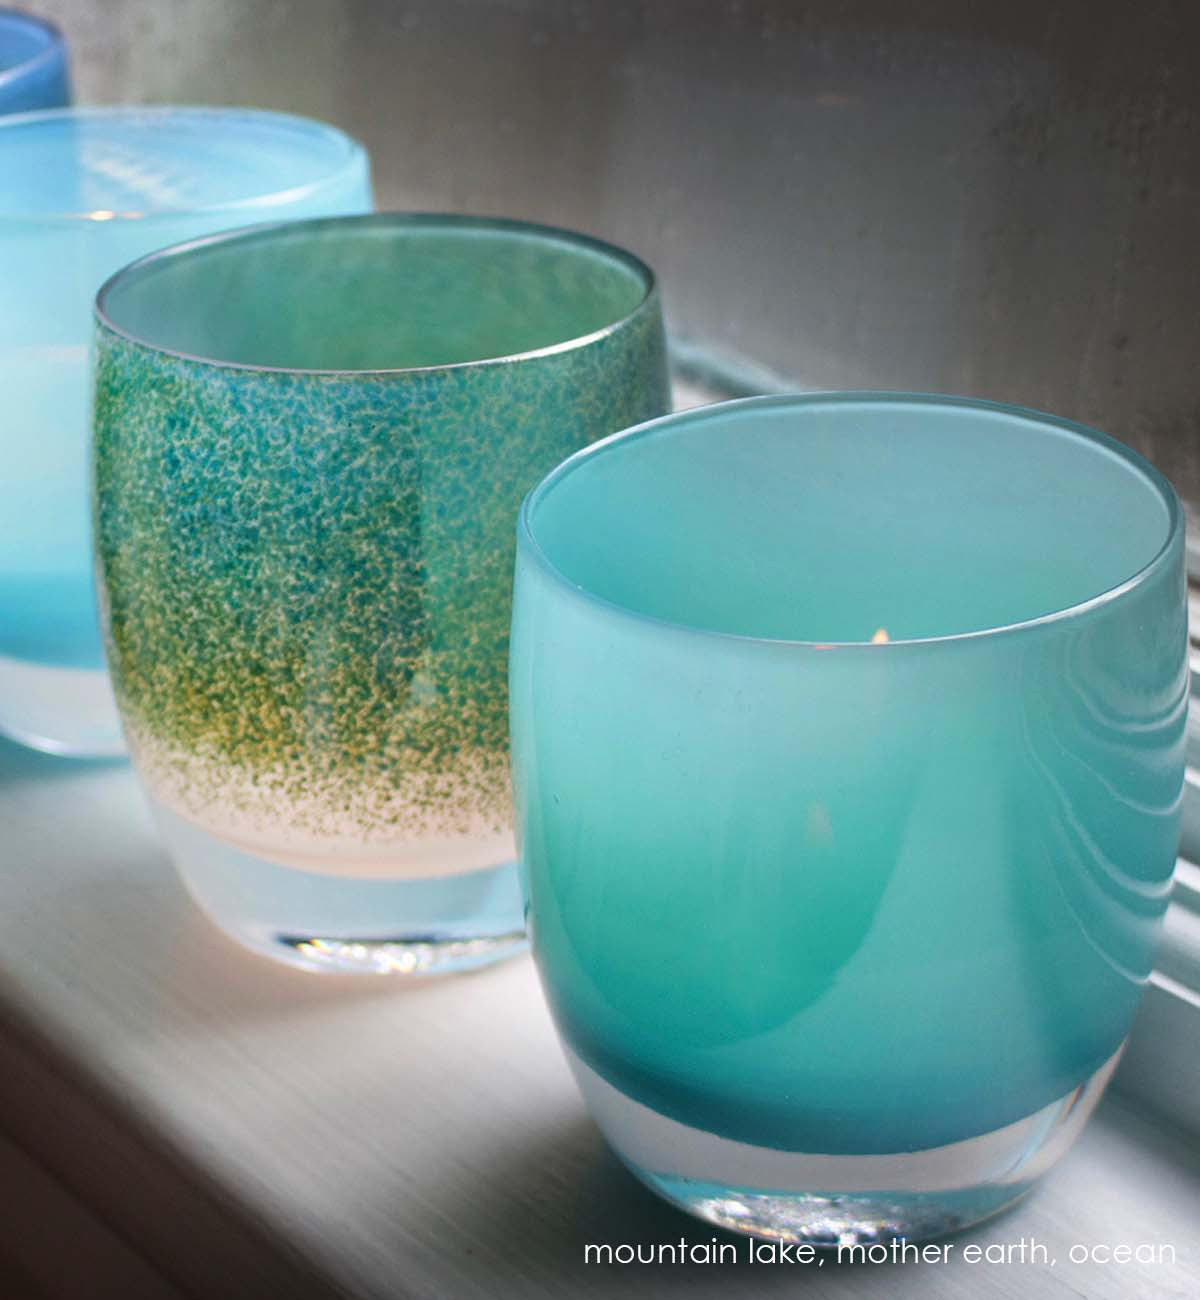 mountain lake blue hand-blown glass votive candle holder. Paired with mother earth and ocean.